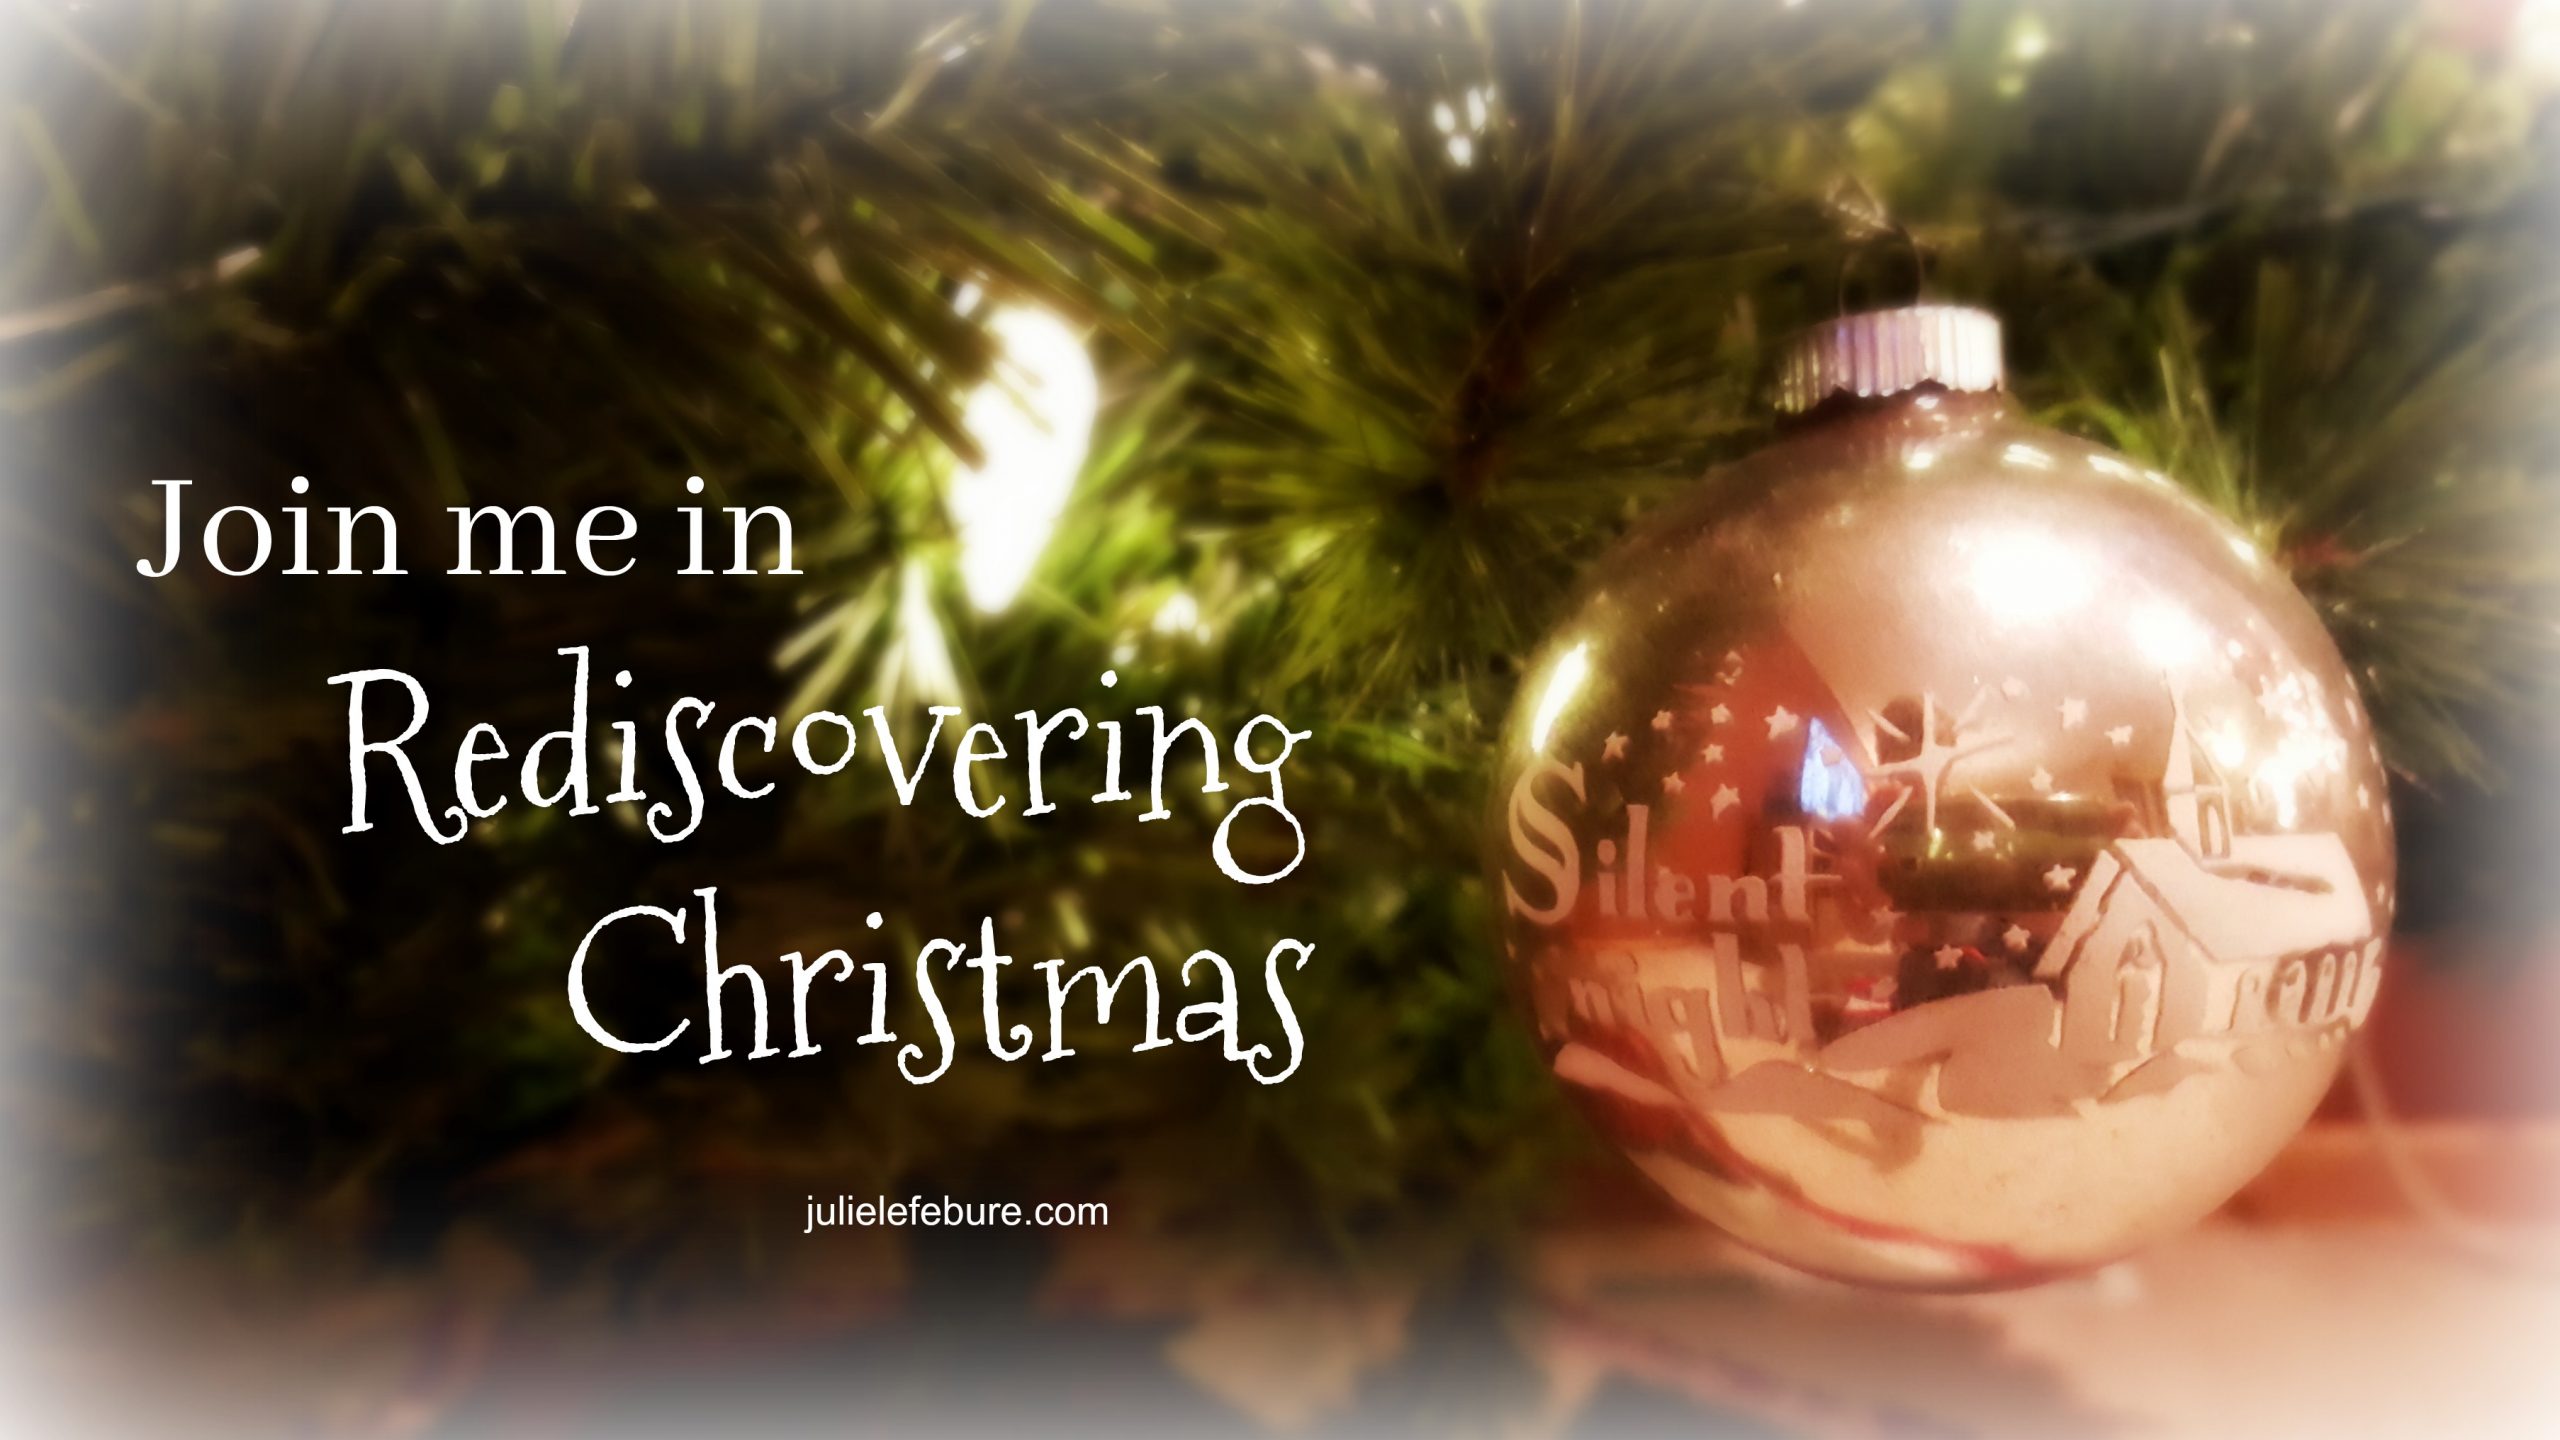 Rediscovering Christmas – An Invitation To Join Me This Season